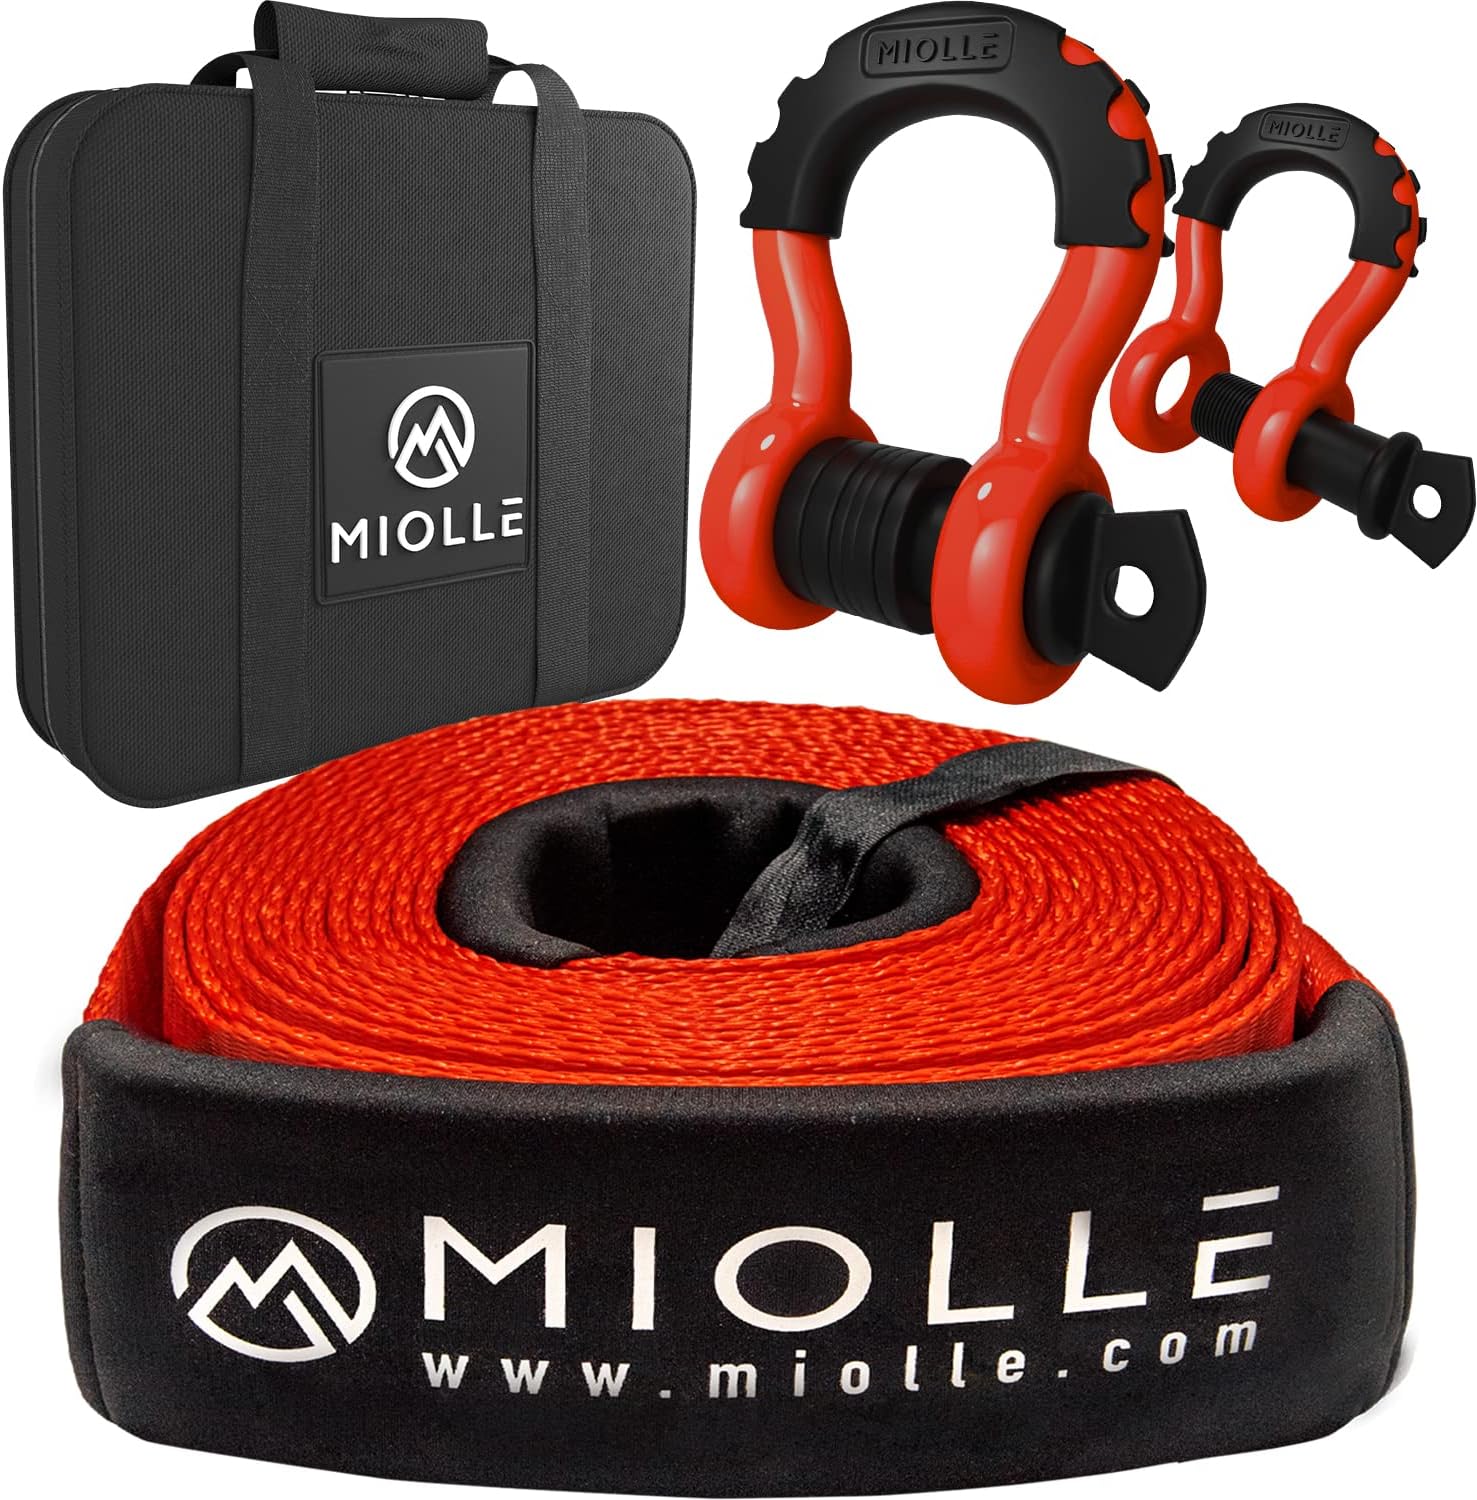 Recovery Wrap Combo Kit Including 30' 20,000 lb Rated Tow Strap, Pair of  Black D-Rings, Snatch Block and Canvas Bag